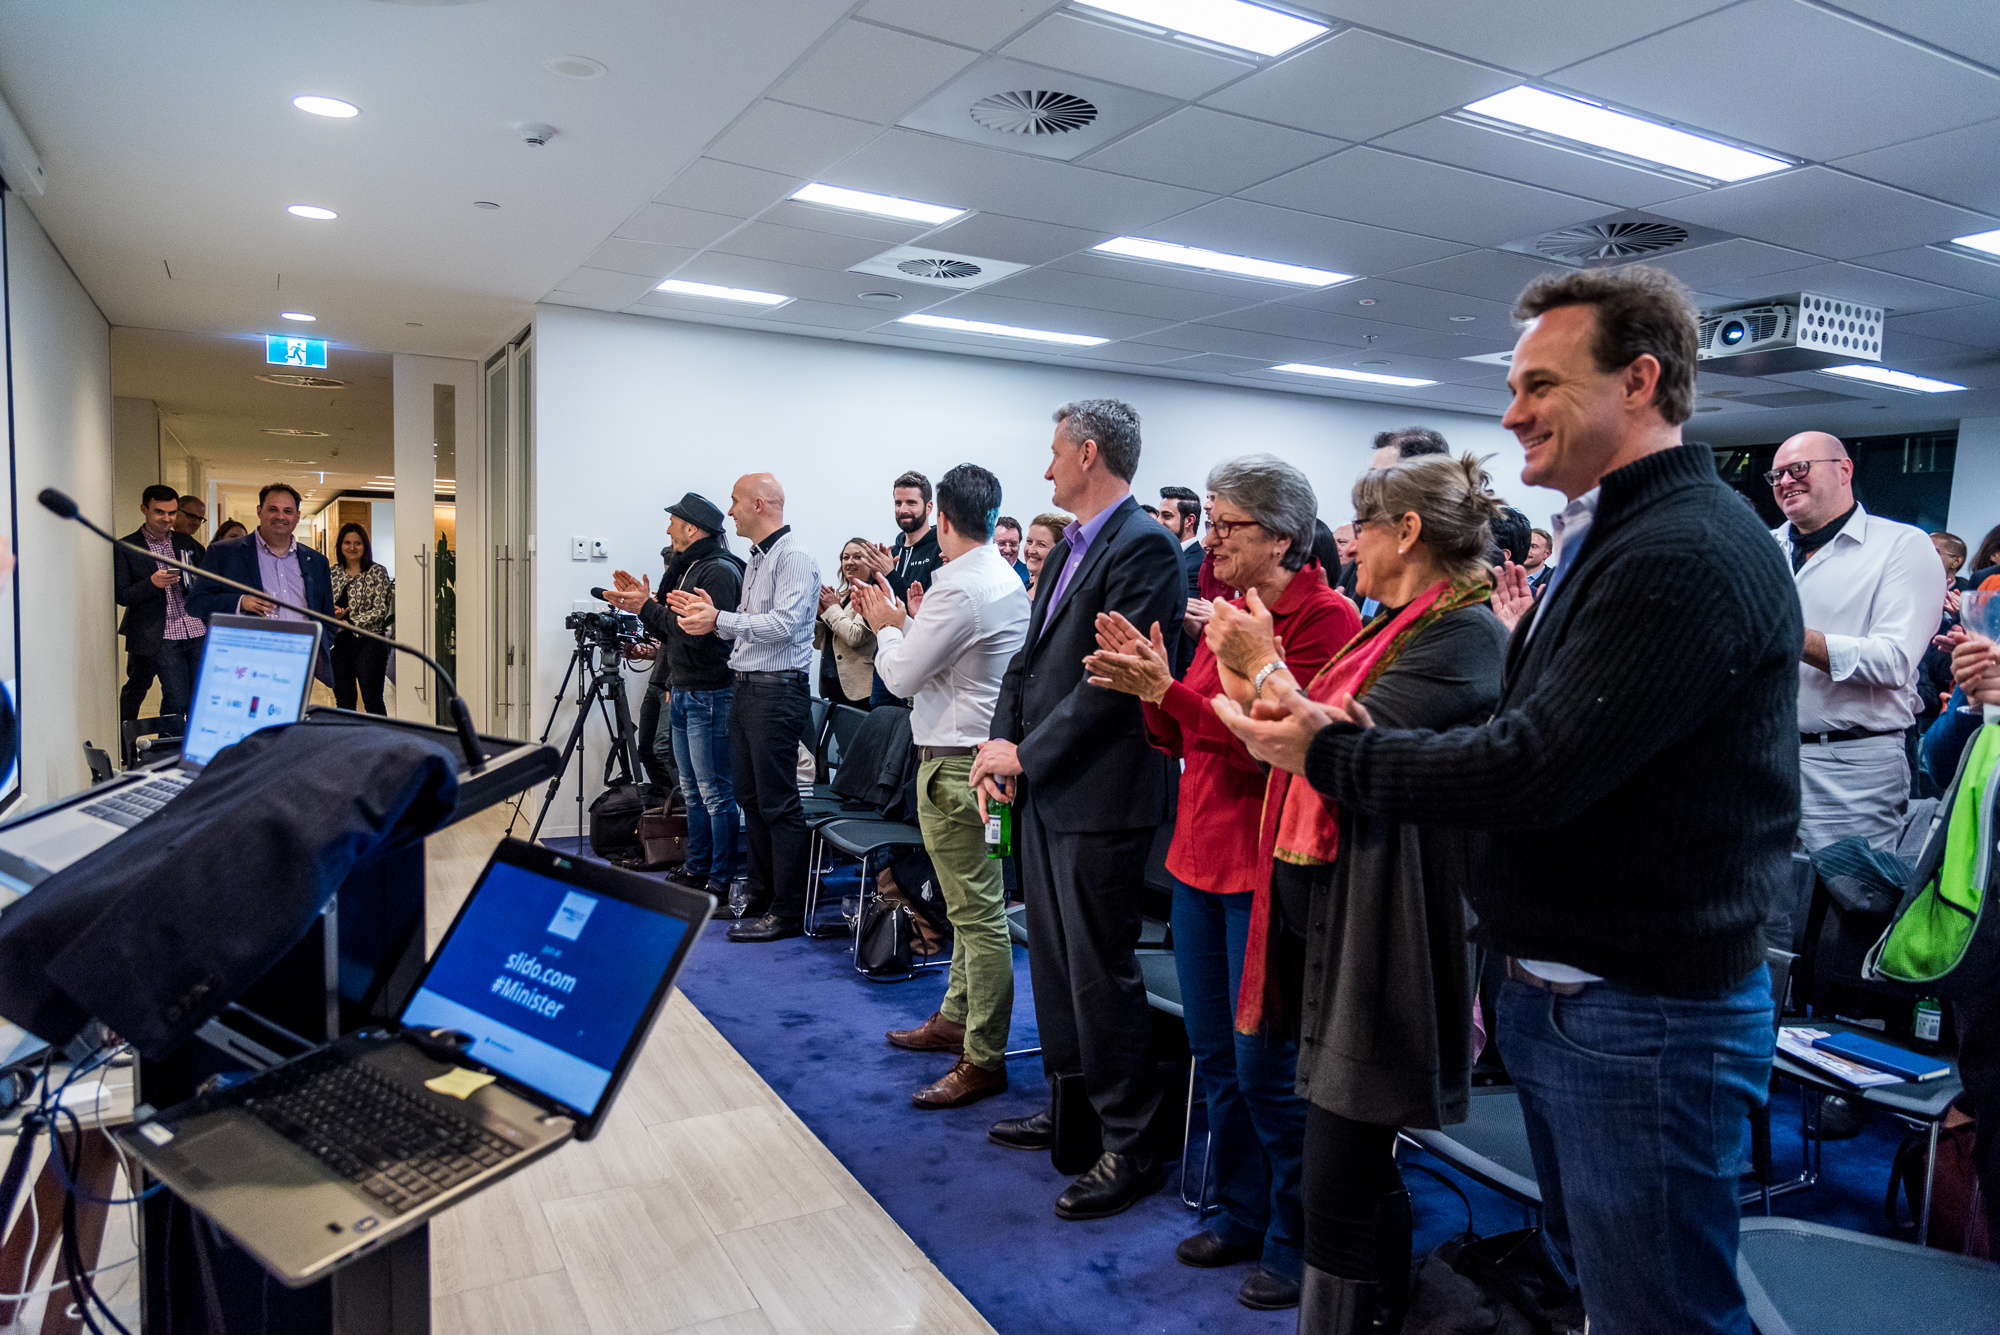 Guests at the Startup Grind event welcome the Minister  (Source: Startup Melbourne)&nbsp;